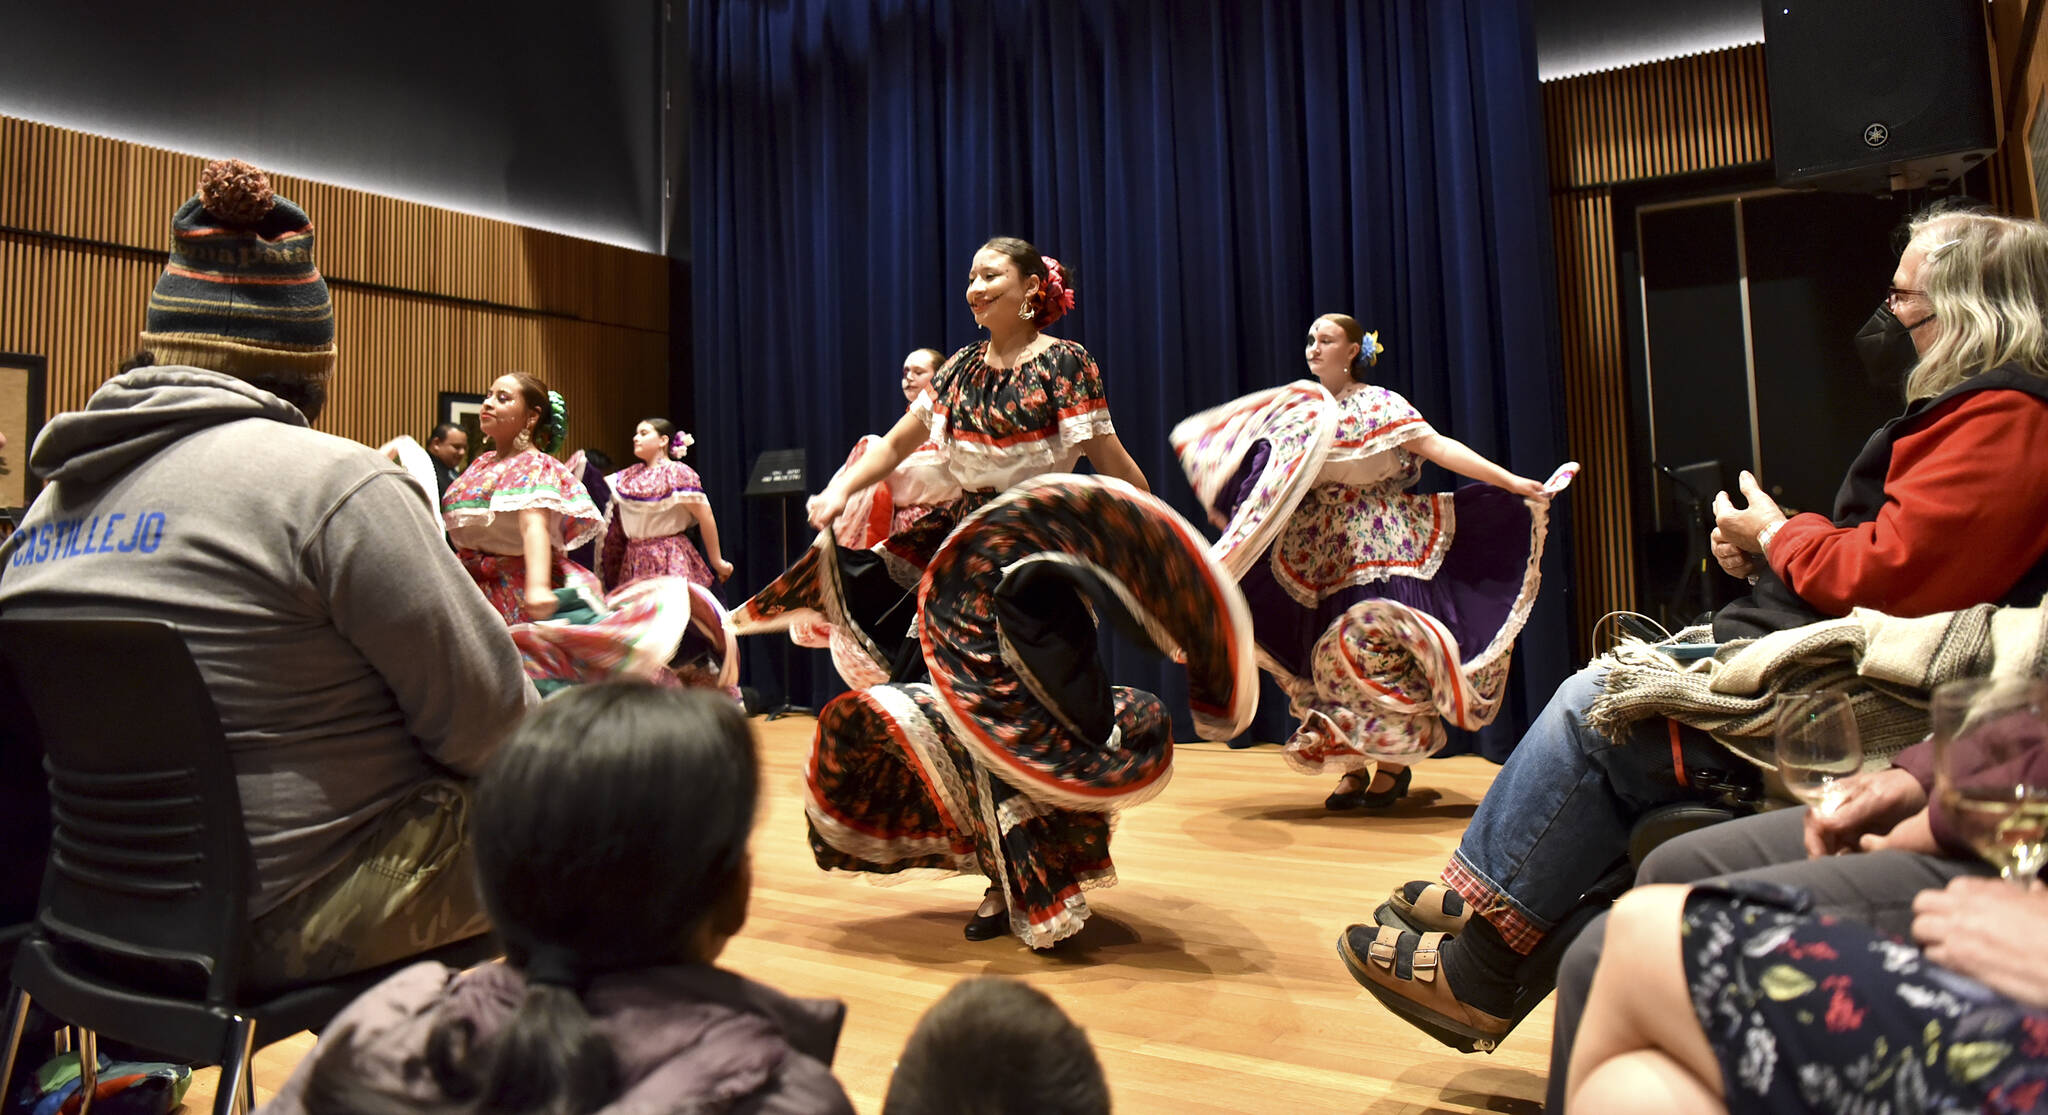 Folklorico dancers twirl in colorful dresses.